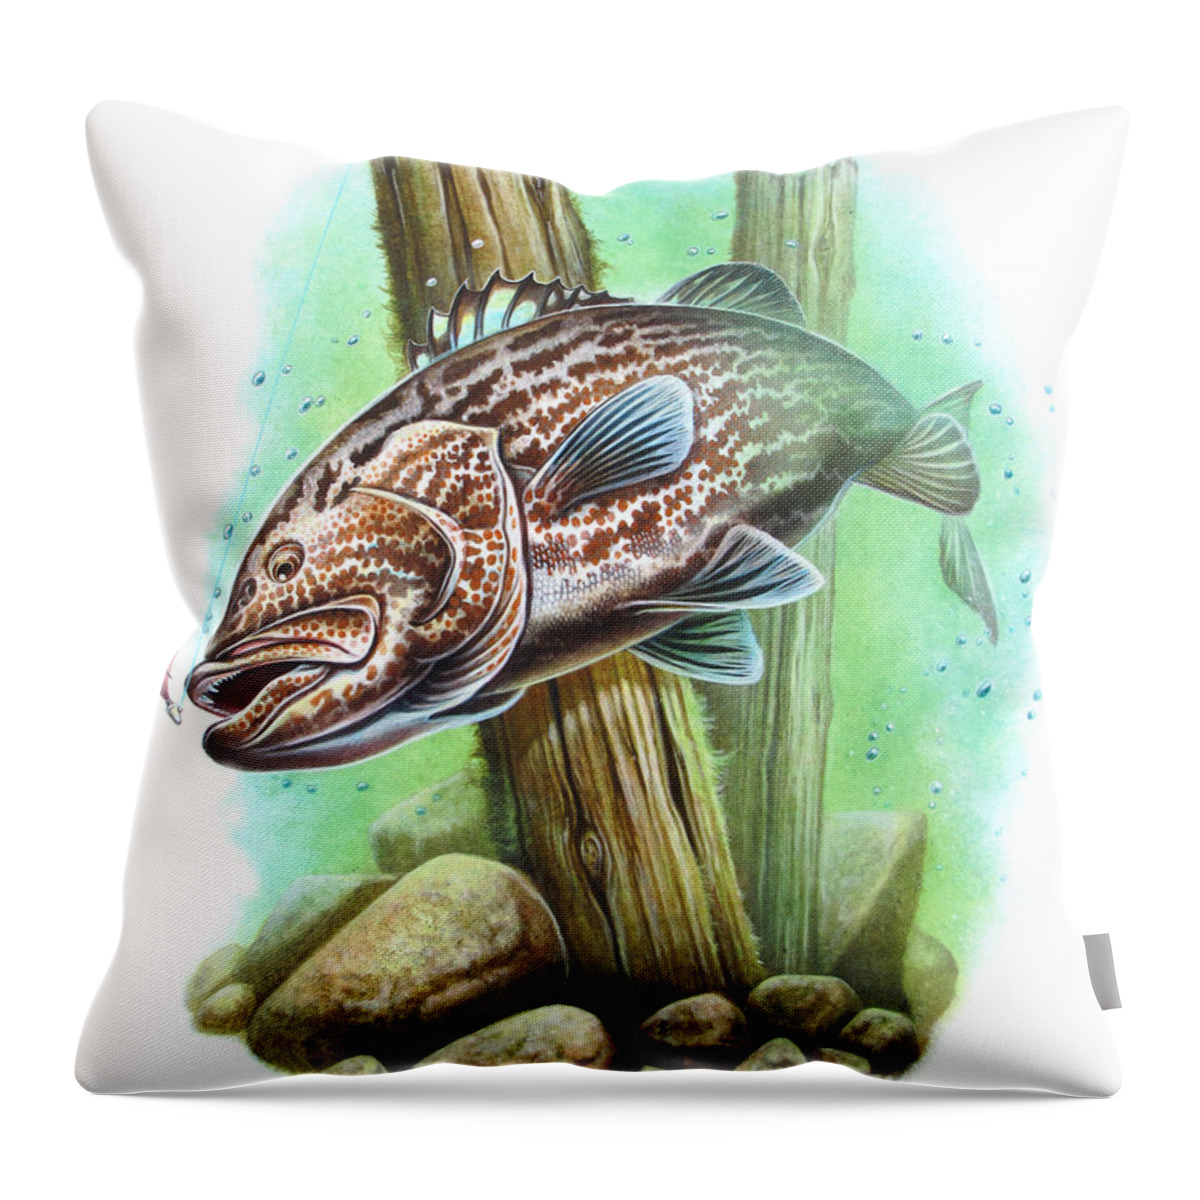 Fish Throw Pillow featuring the painting Grouper Fish by JQ Licensing